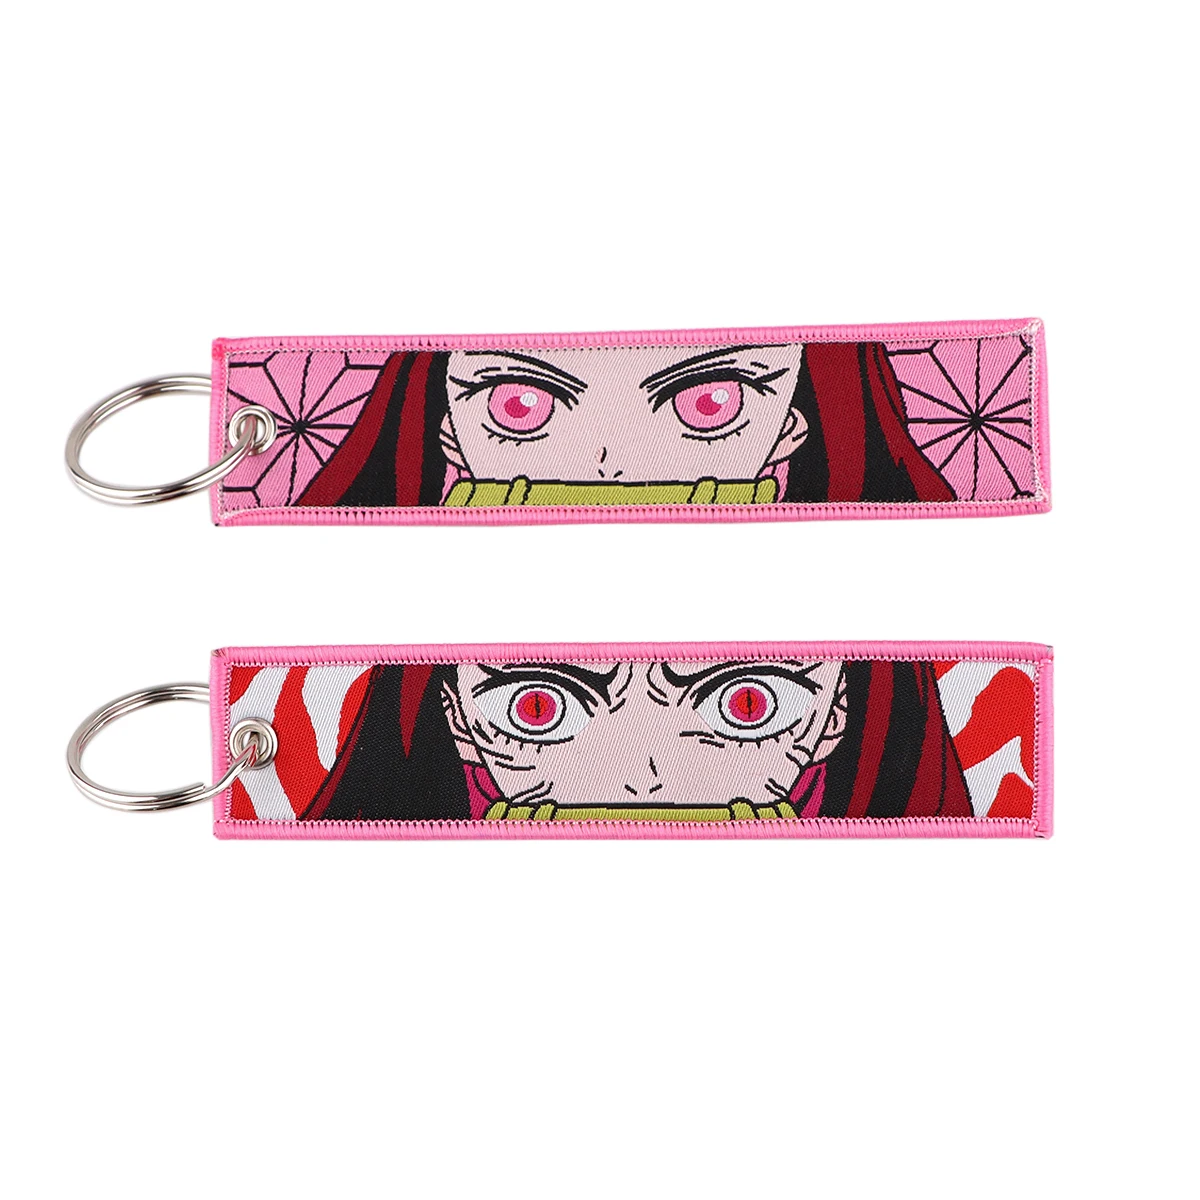 Japanese Anime Demon Slayer Key Tag New Embroidery Key Fobs for Motorcycles Cars Bag Backpack Novelty 2 - Demon Slayer Plush